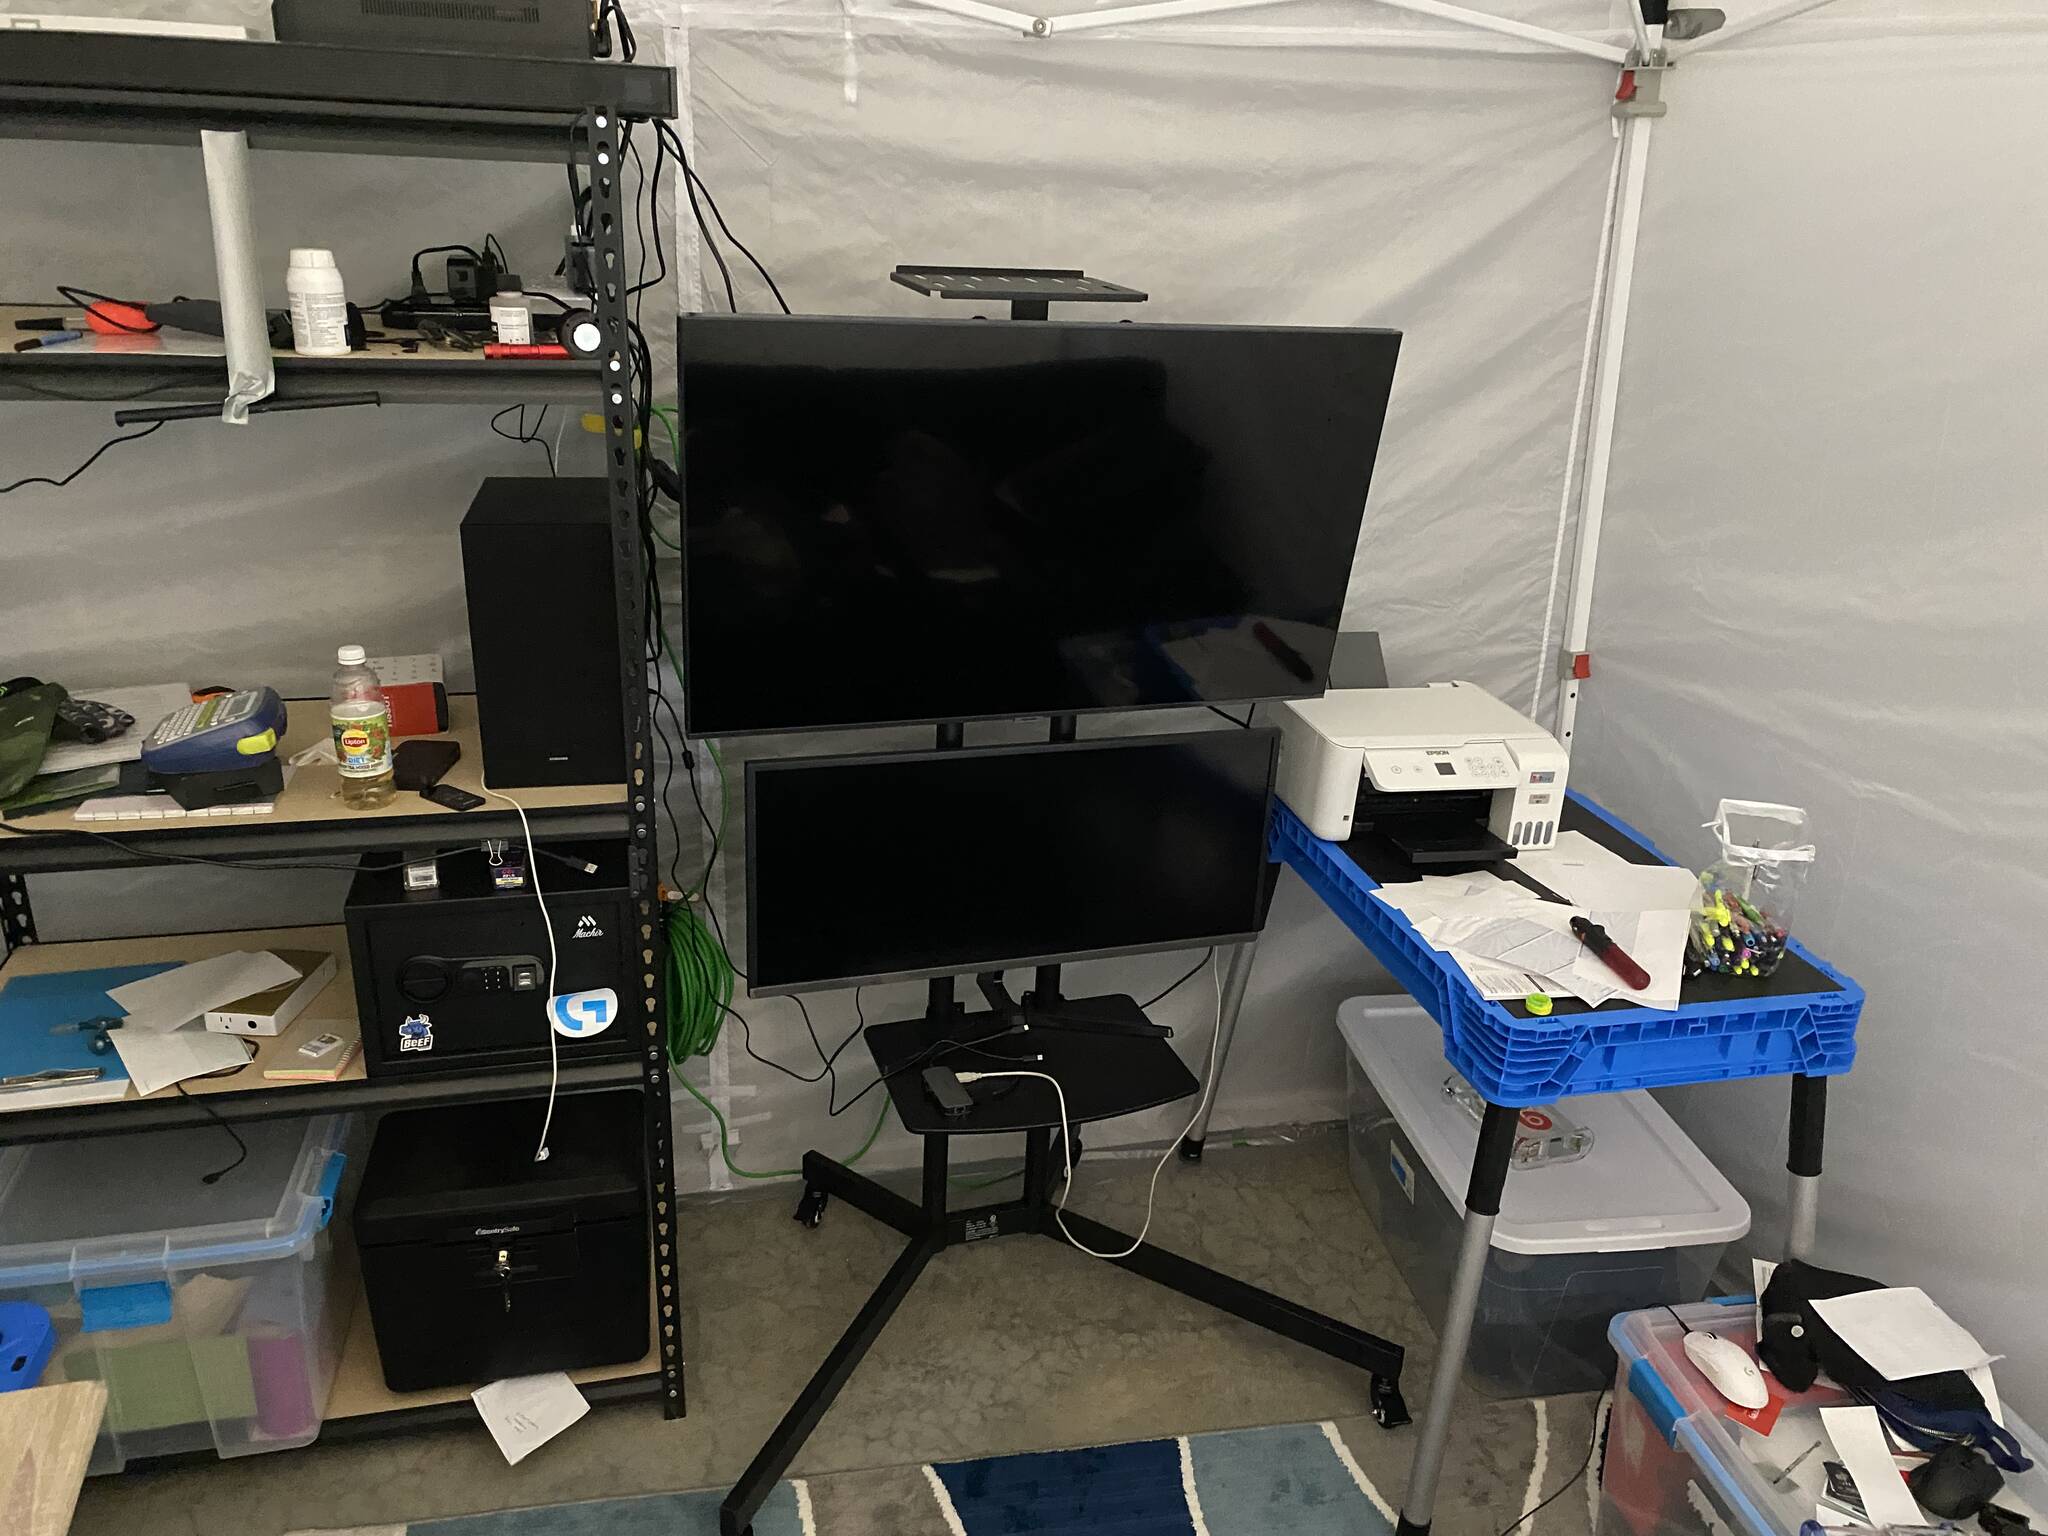 Courtesy photo / Aberdeen Police Department
A storage space registered to a man convicted last month of identity theft following his arrest in Aberdeen was in use as a hub for his activities, police say.